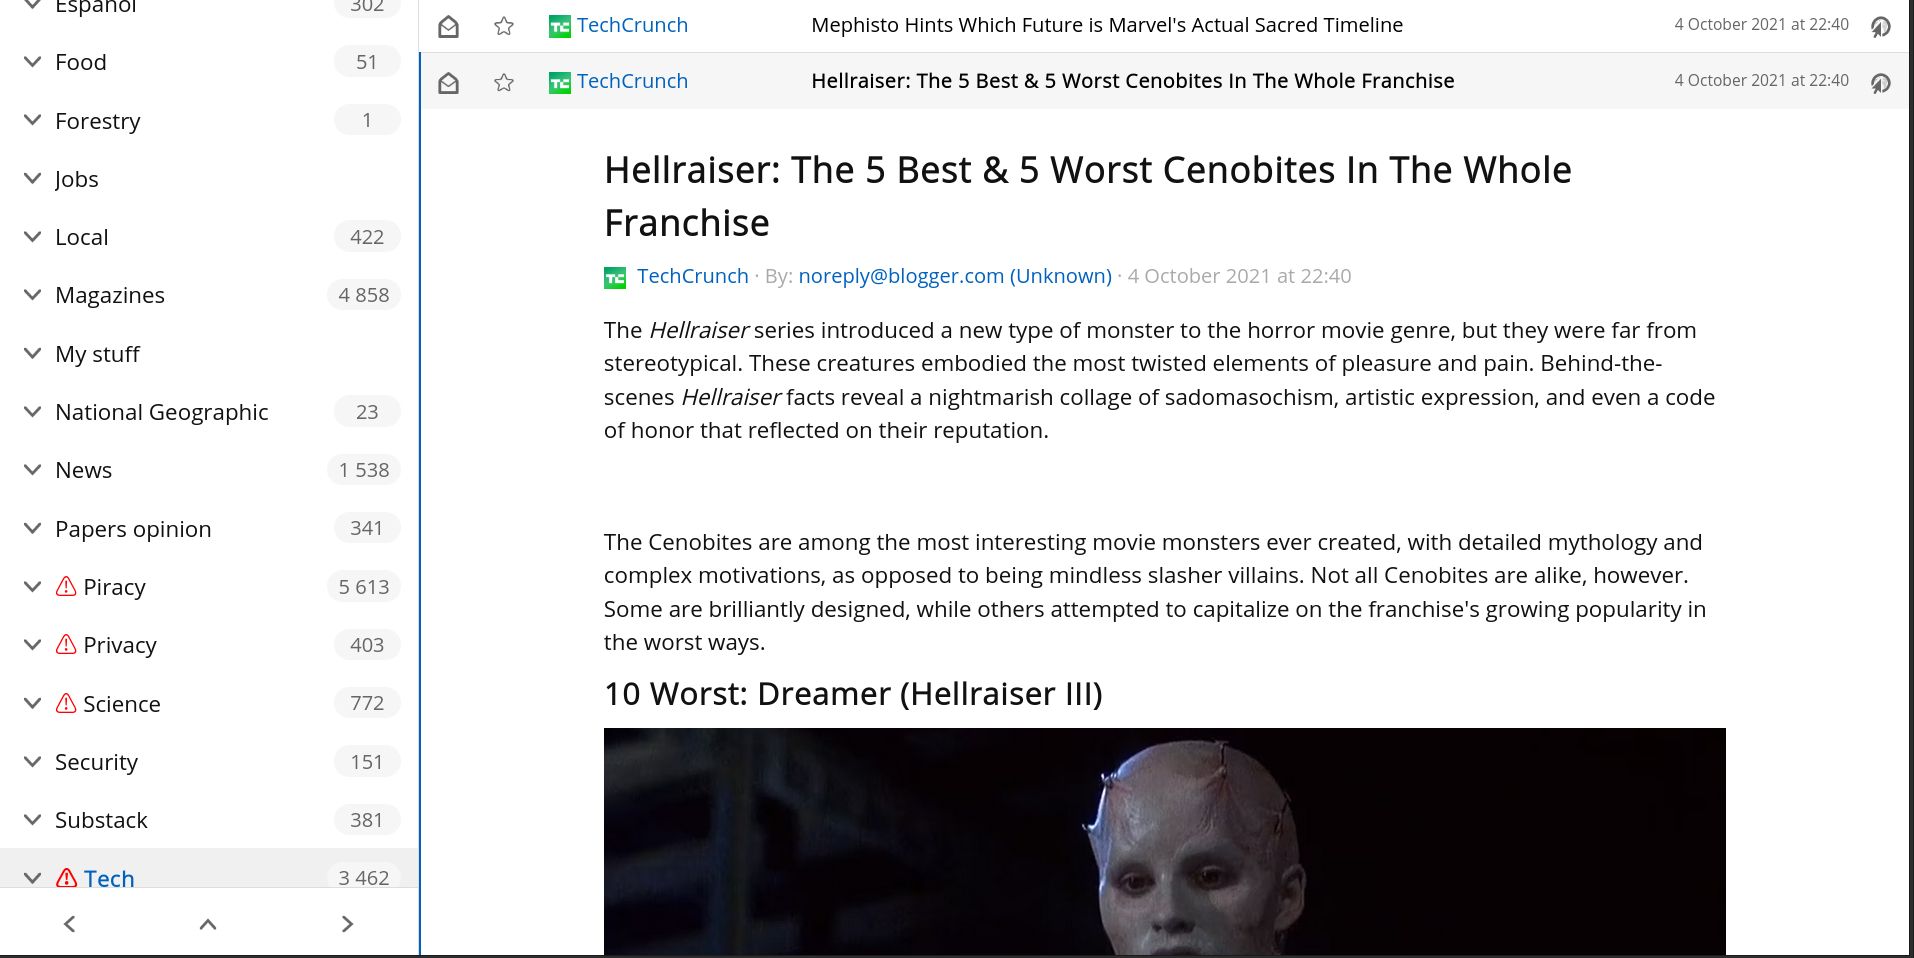 Supposed TechCrunch story: Hellraiser: The 5 Best & 5 Worst Cenobites In The Whole Franchise